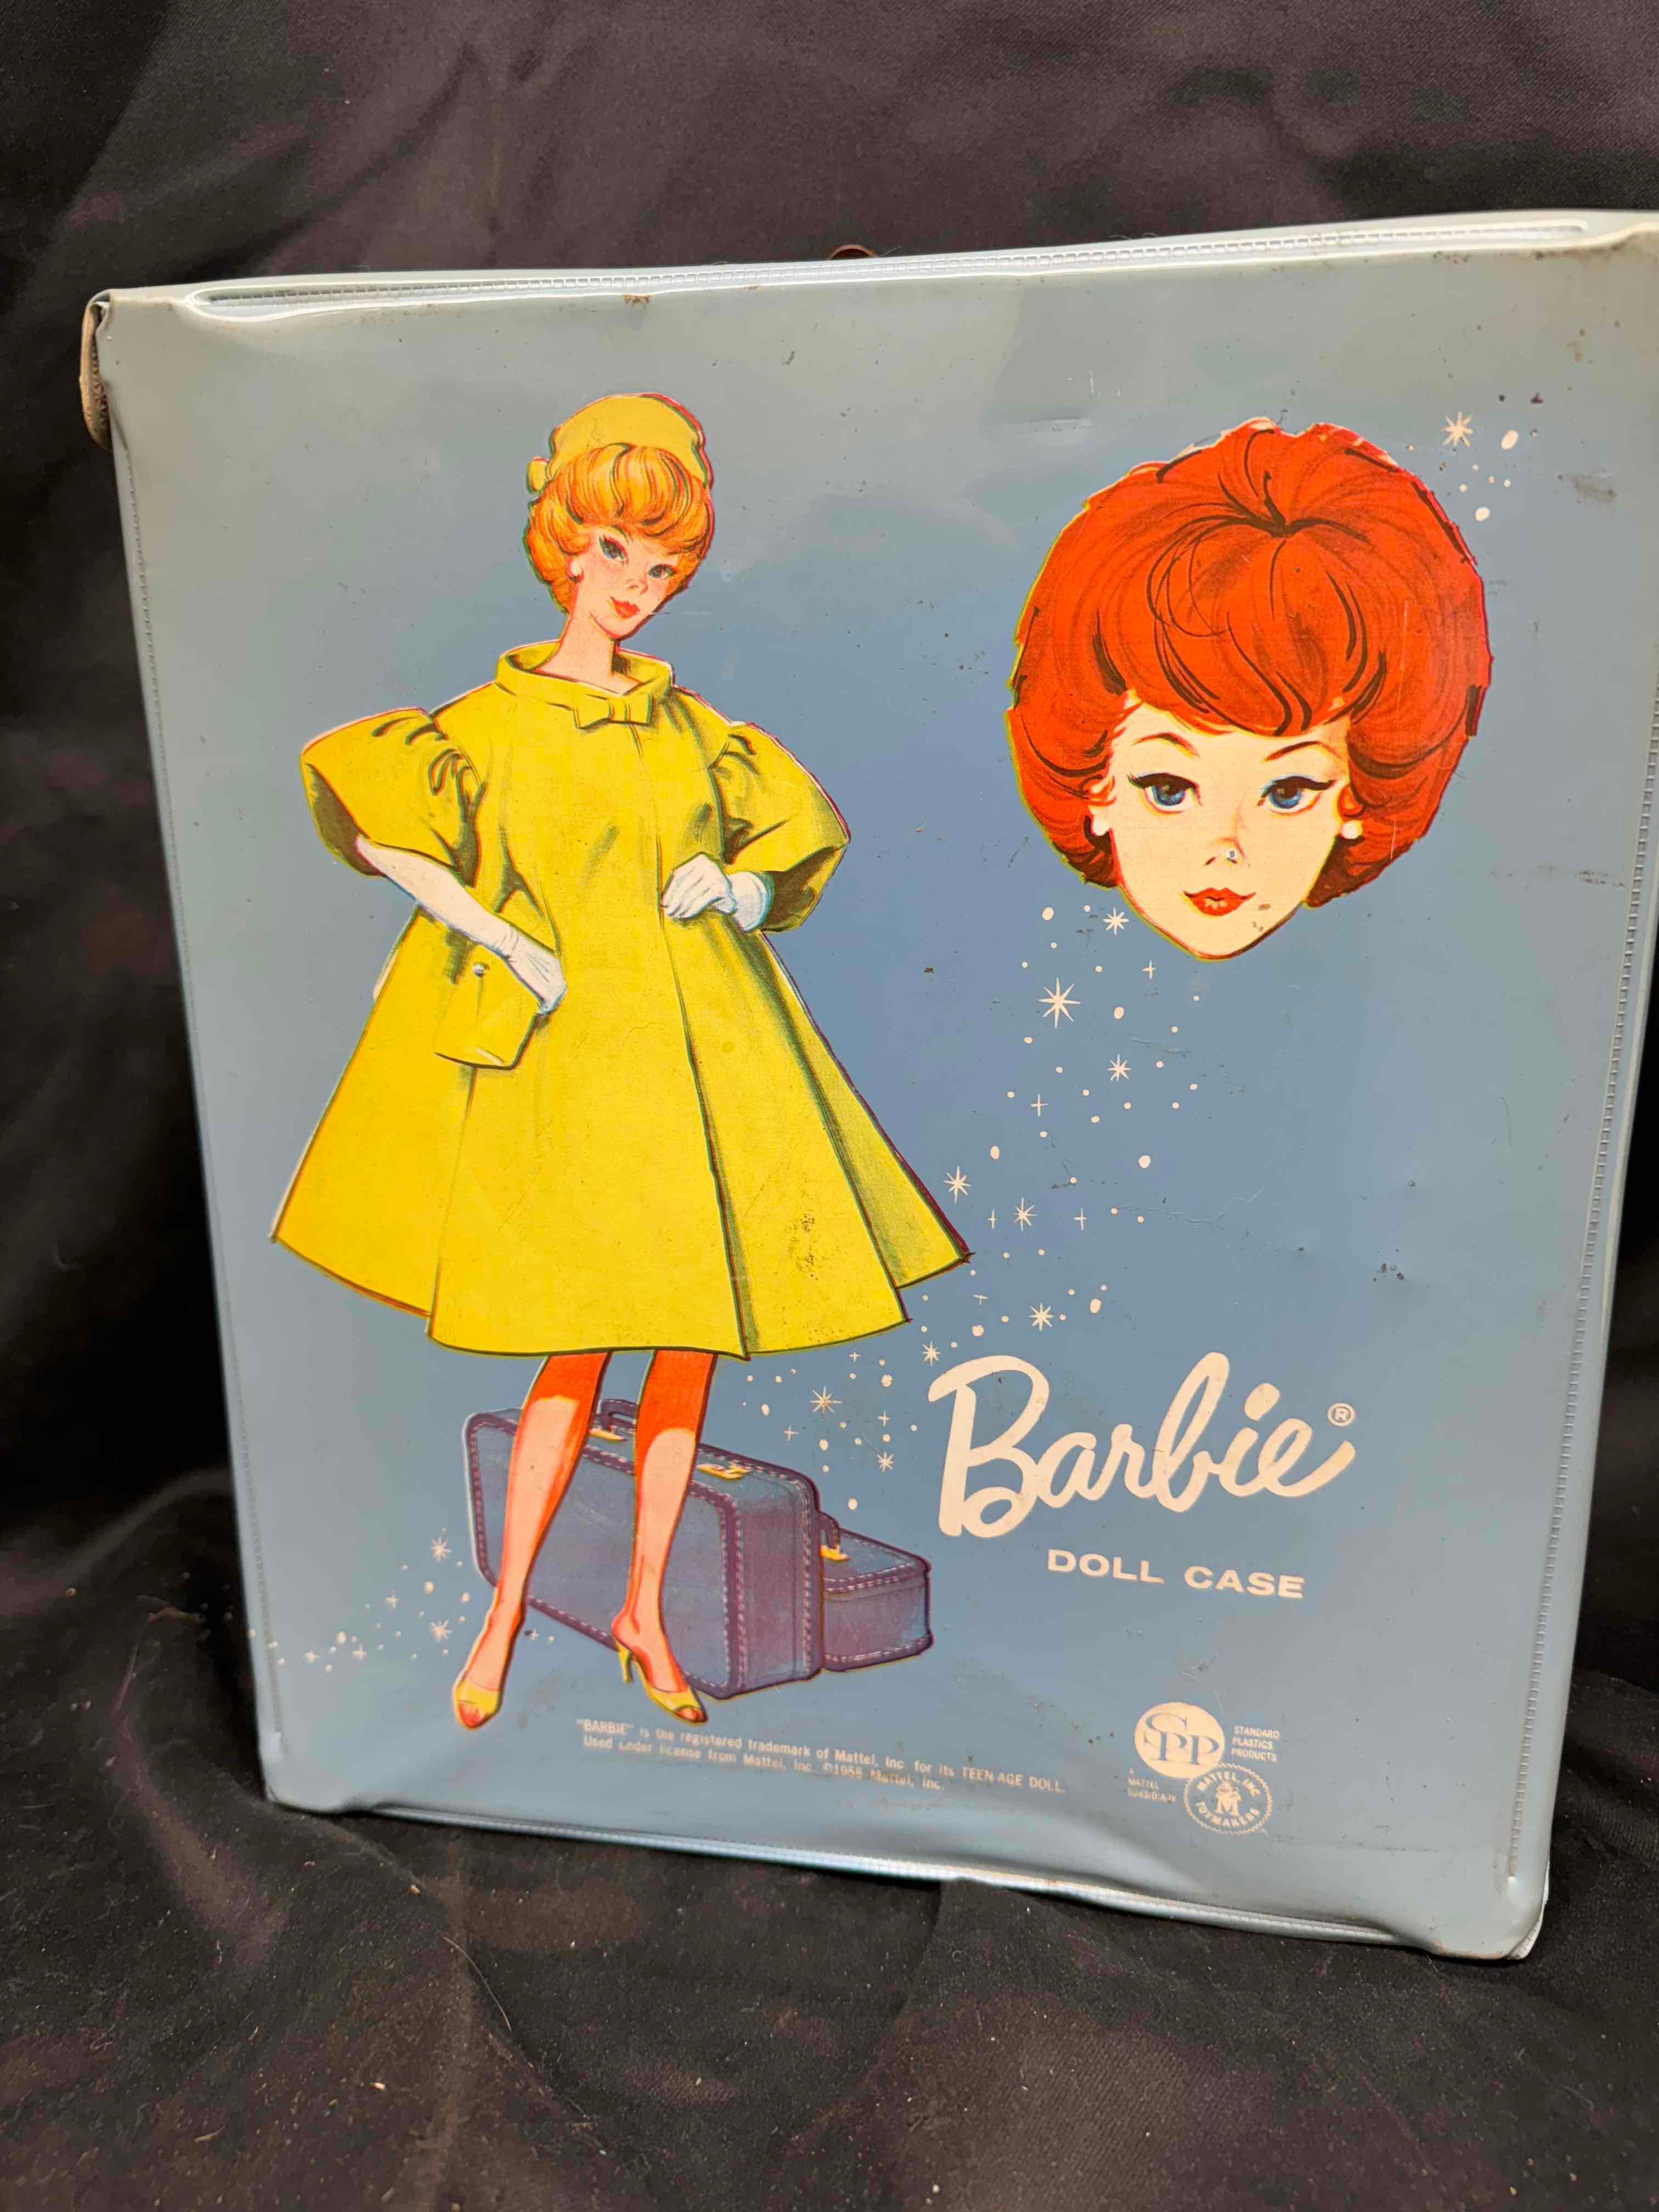 Vintage 1960s Barbie Cases and Penny Brite Doll